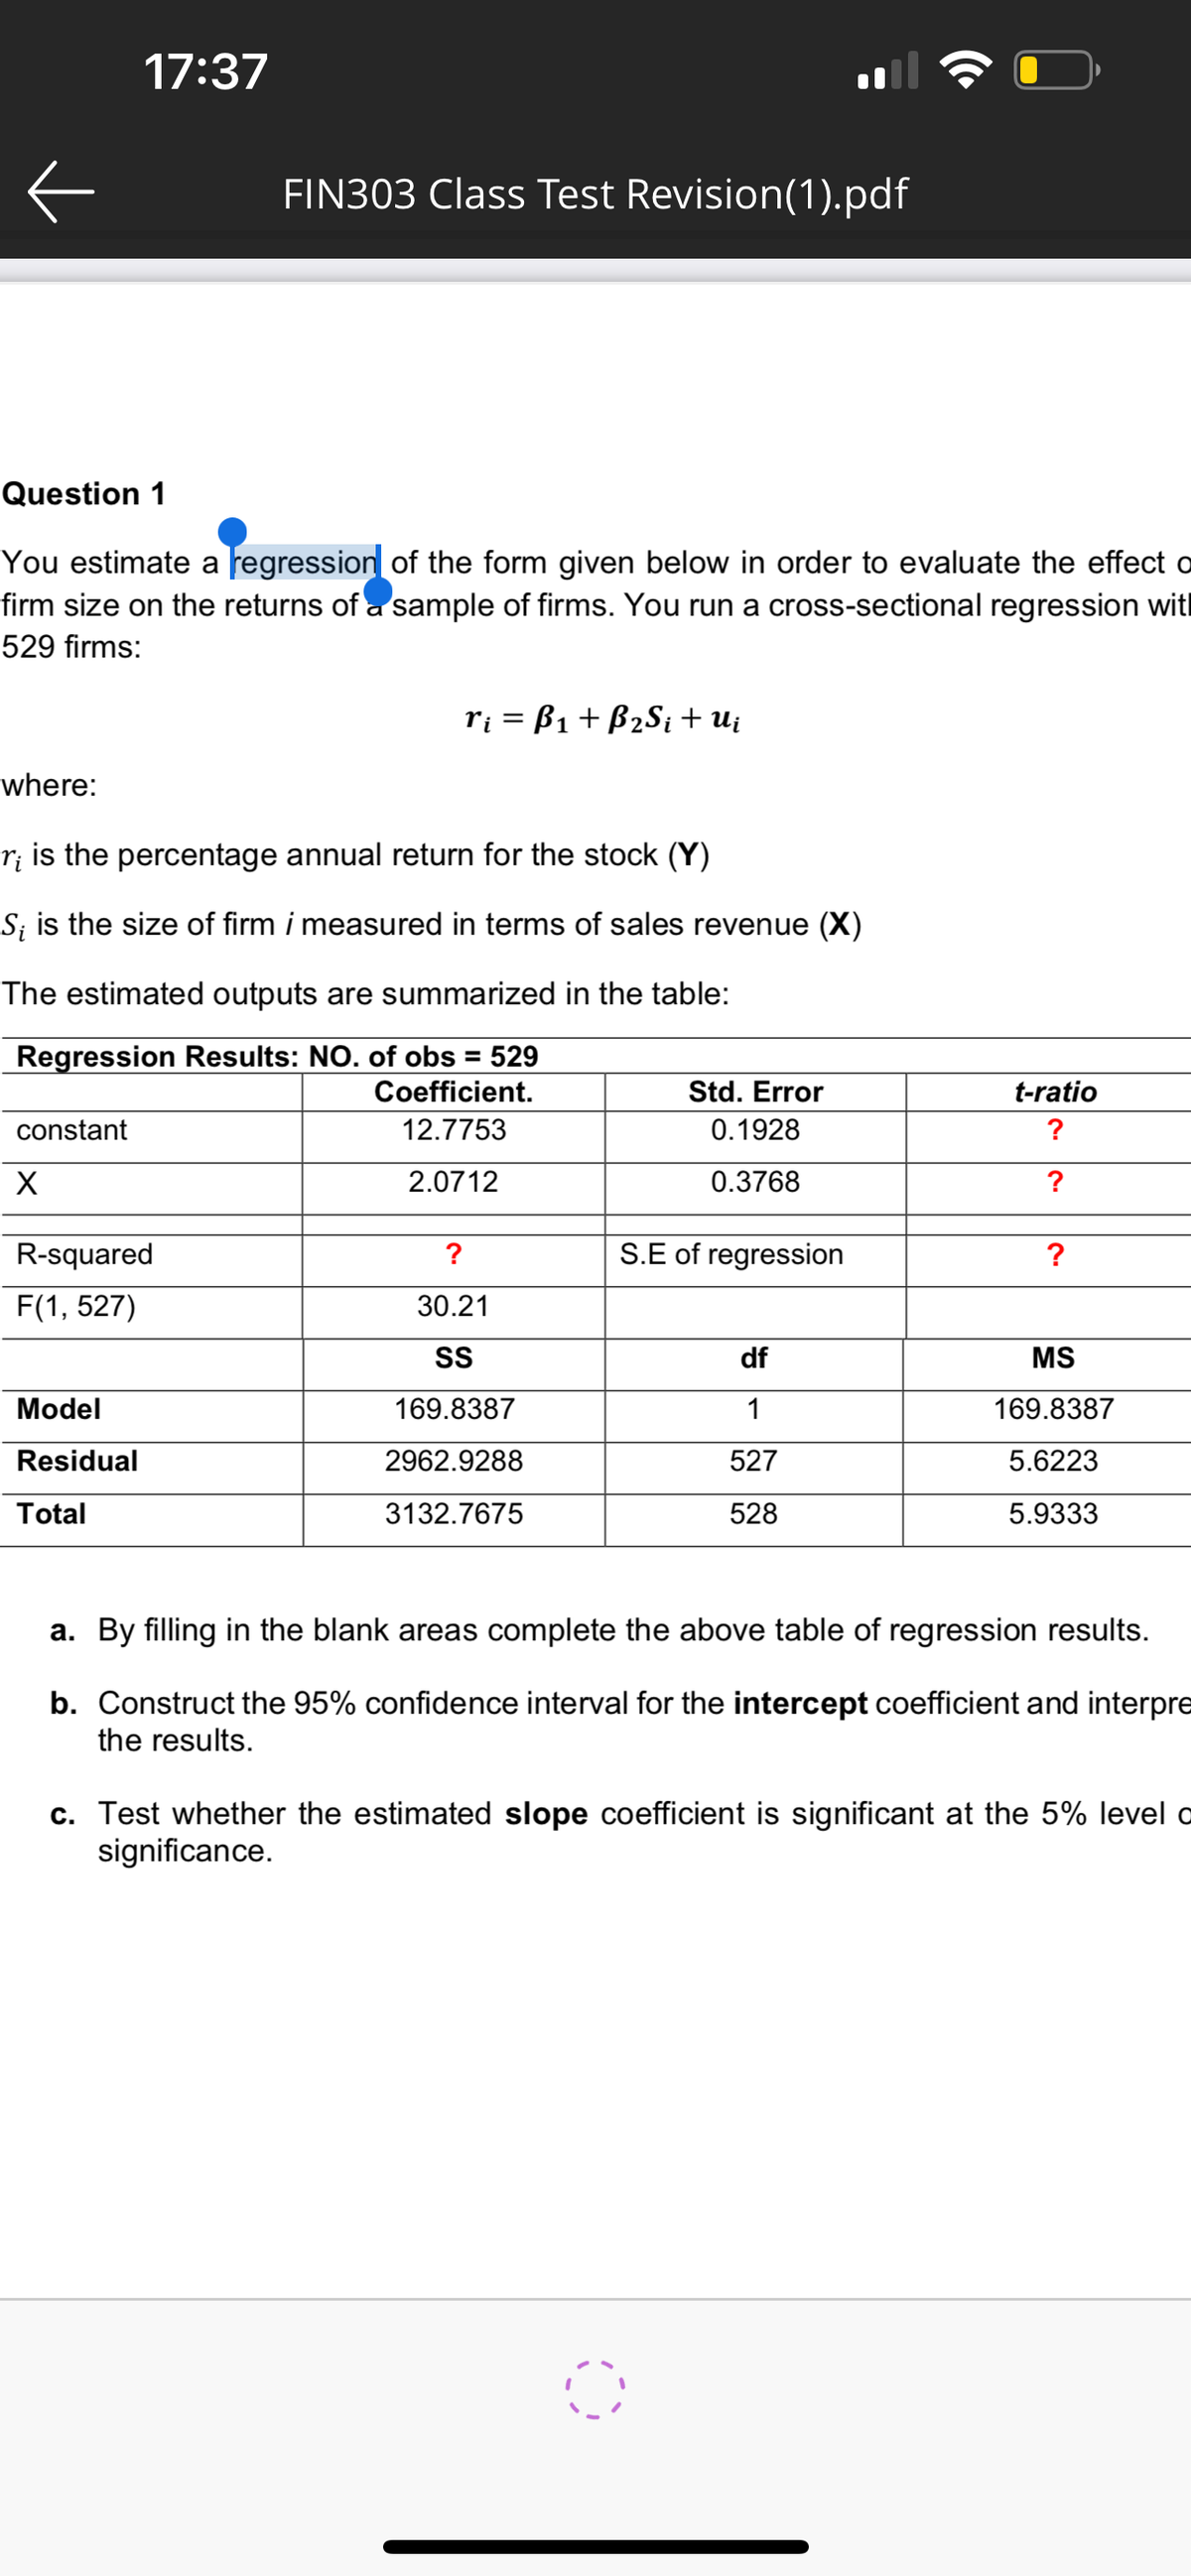 Question 1
You estimate a regression of the form given below in order to evaluate the effect o
firm size on the returns of a sample of firms. You run a cross-sectional regression wit
529 firms:
constant
17:37
X
where:
r¡ is the percentage annual return for the stock (Y)
S; is the size of firm i measured in terms of sales revenue (X)
The estimated outputs are summarized in the table:
Regression Results: NO. of obs = 529
Coefficient.
12.7753
2.0712
FIN303 Class Test Revision(1).pdf
R-squared
F(1, 527)
Model
Residual
Total
ri = B₁ + B₂Si + Ui
?
30.21
SS
169.8387
2962.9288
3132.7675
Std. Error
0.1928
0.3768
S.E of regression
df
1
527
528
t-ratio
?
?
?
MS
169.8387
5.6223
5.9333
a. By filling in the blank areas complete the above table of regression results.
b. Construct the 95% confidence interval for the intercept coefficient and interpre
the results.
c. Test whether the estimated slope coefficient is significant at the 5% level o
significance.